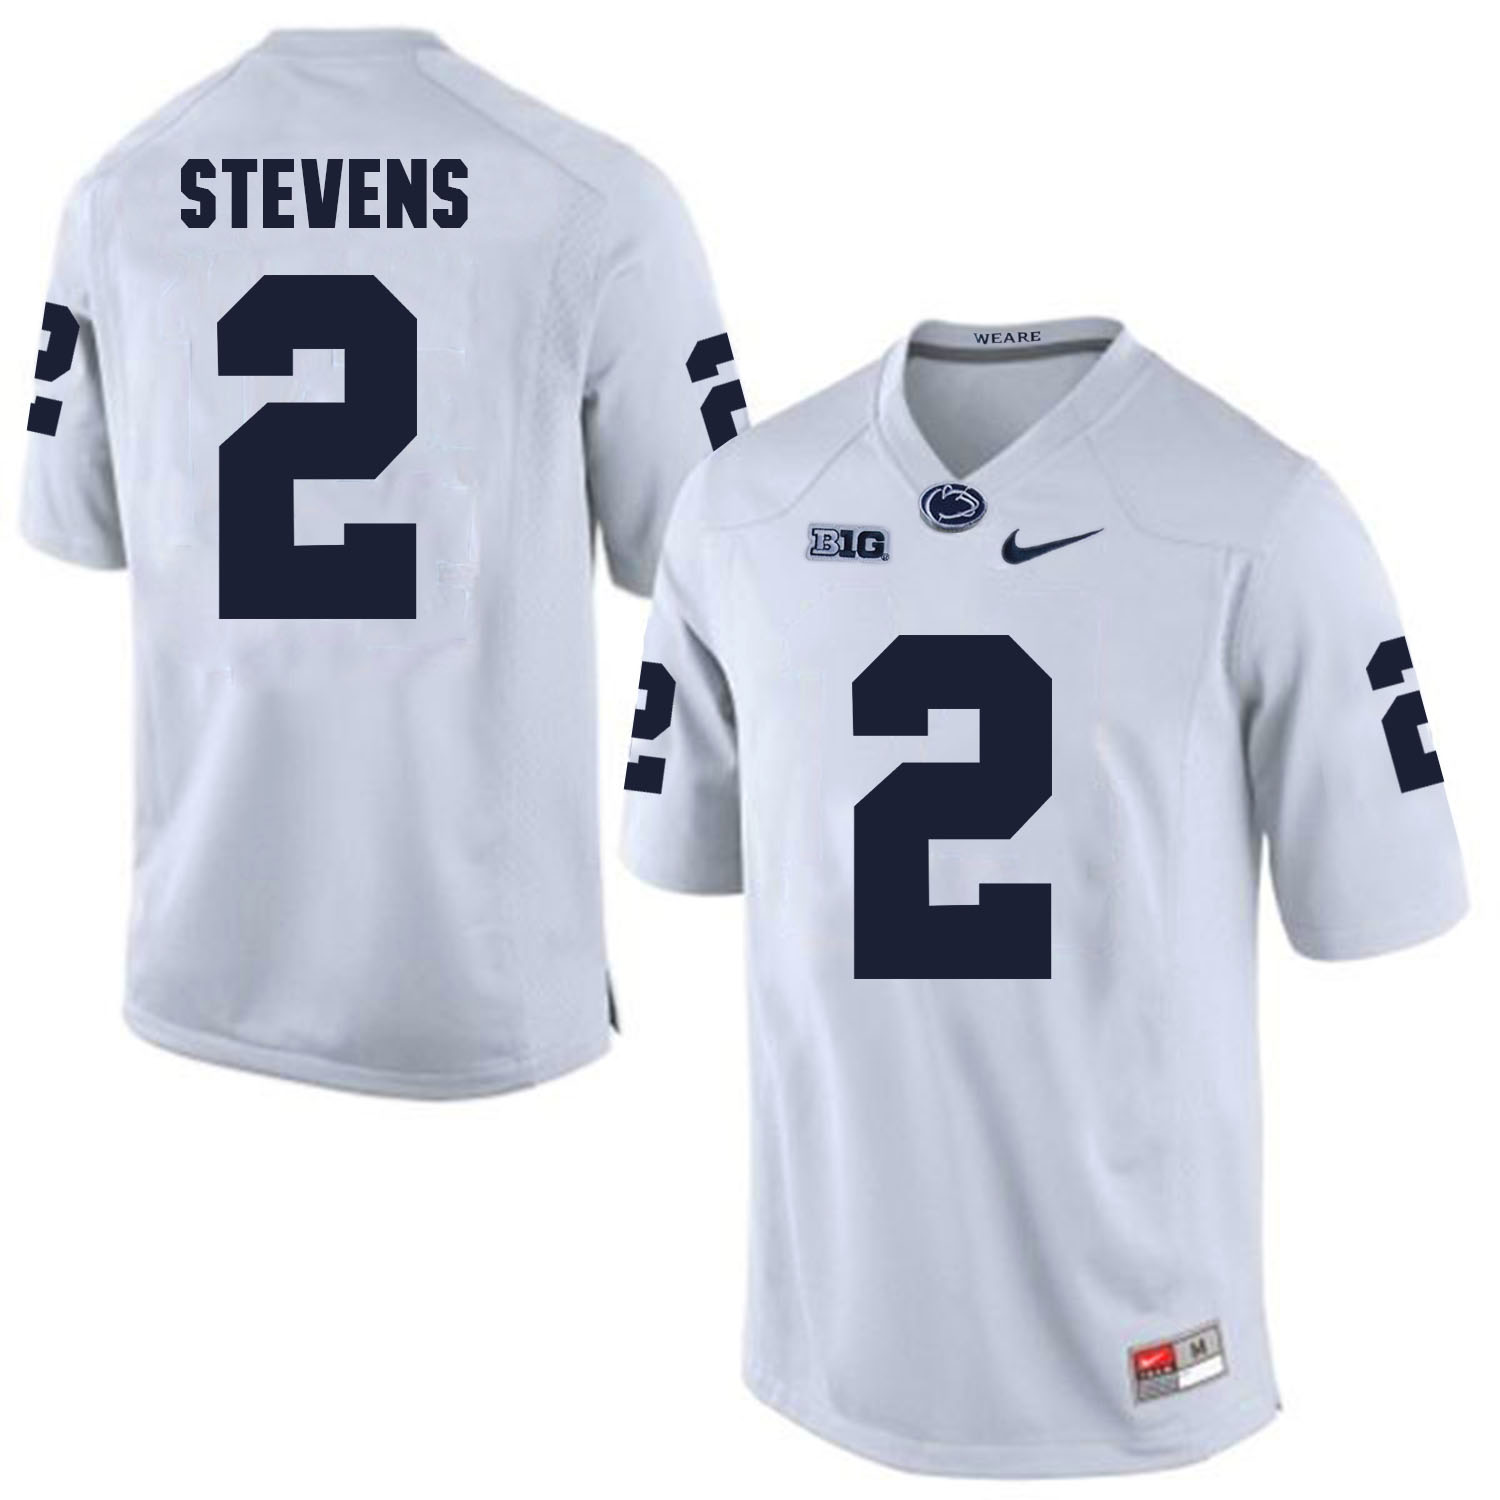 Penn State Nittany Lions 2 Tommy Stevens White College Football Jersey